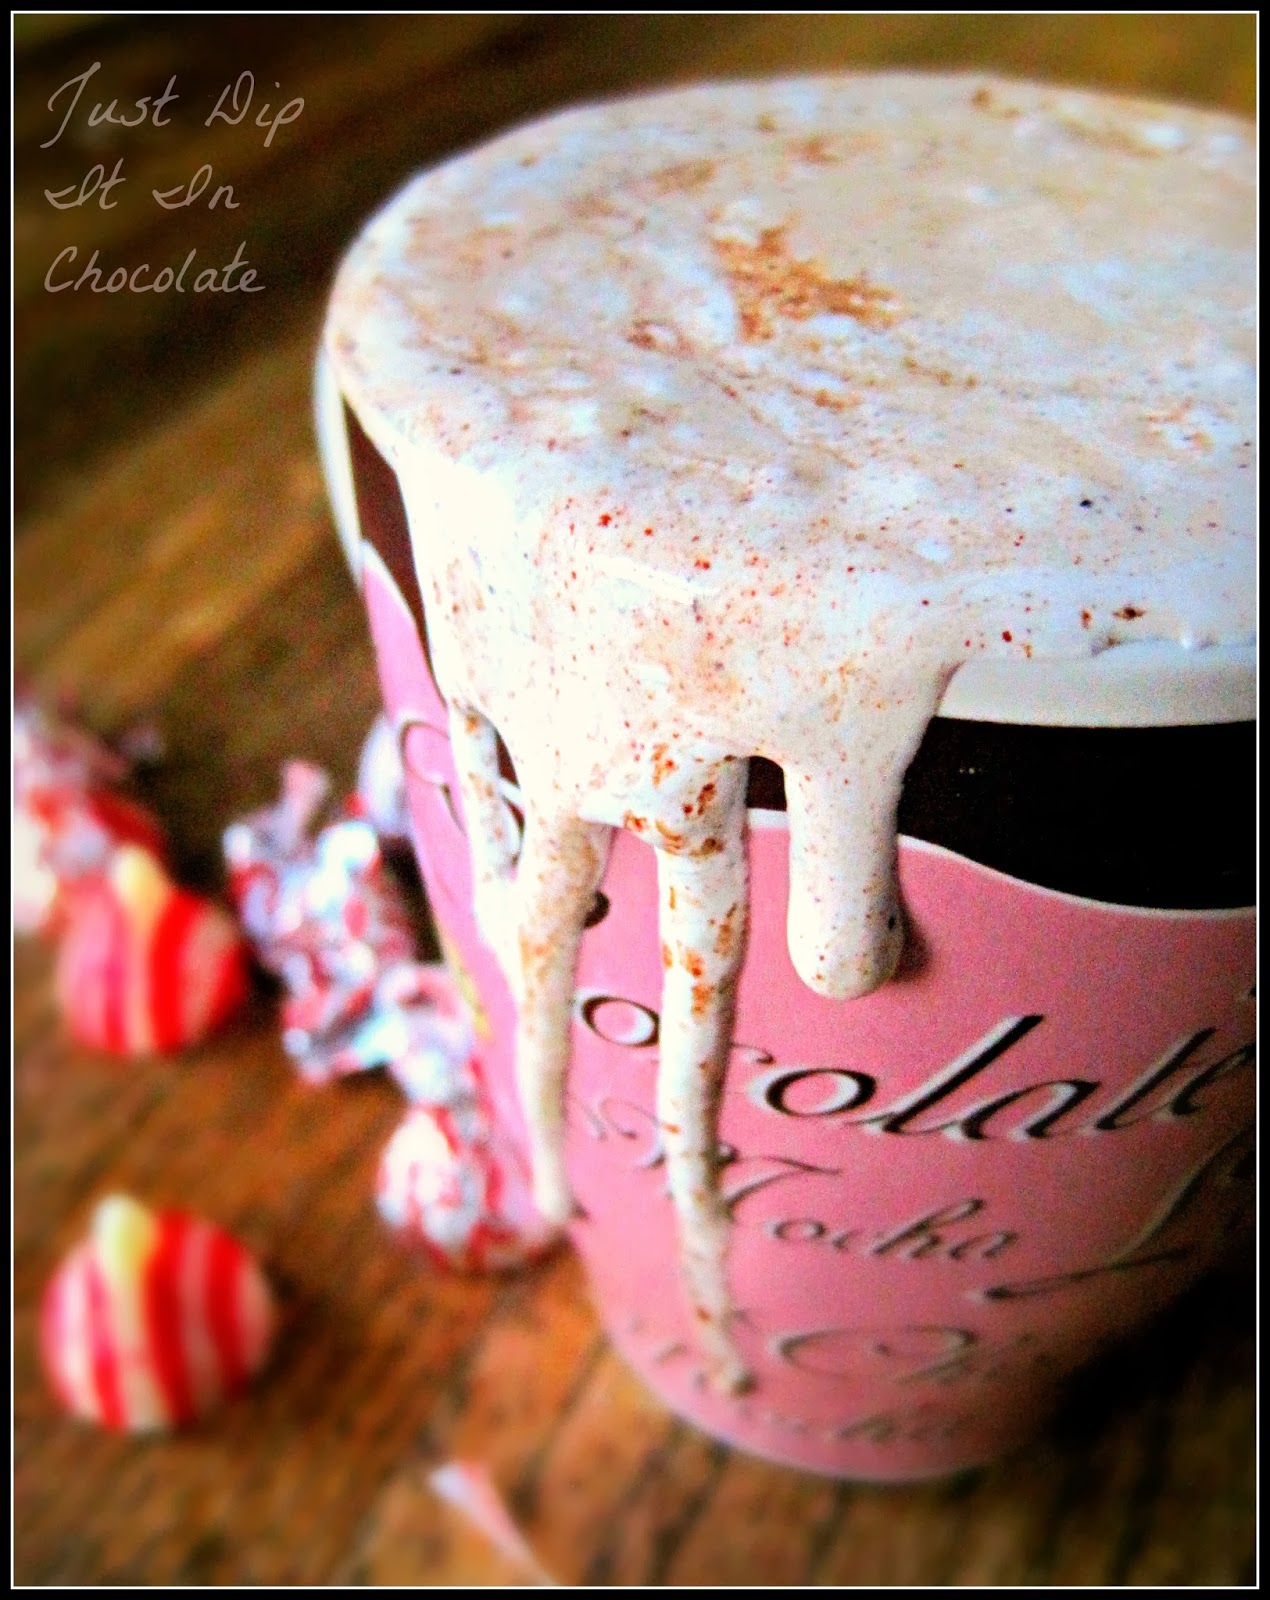 Hot Tamales Spiked Hot Chocolate Recipe, Sweet, Spicy and Hot...just like the candy but with a little kick for us adults to indulge when the temps go down! #hotchocolate #cocoa #hottamales